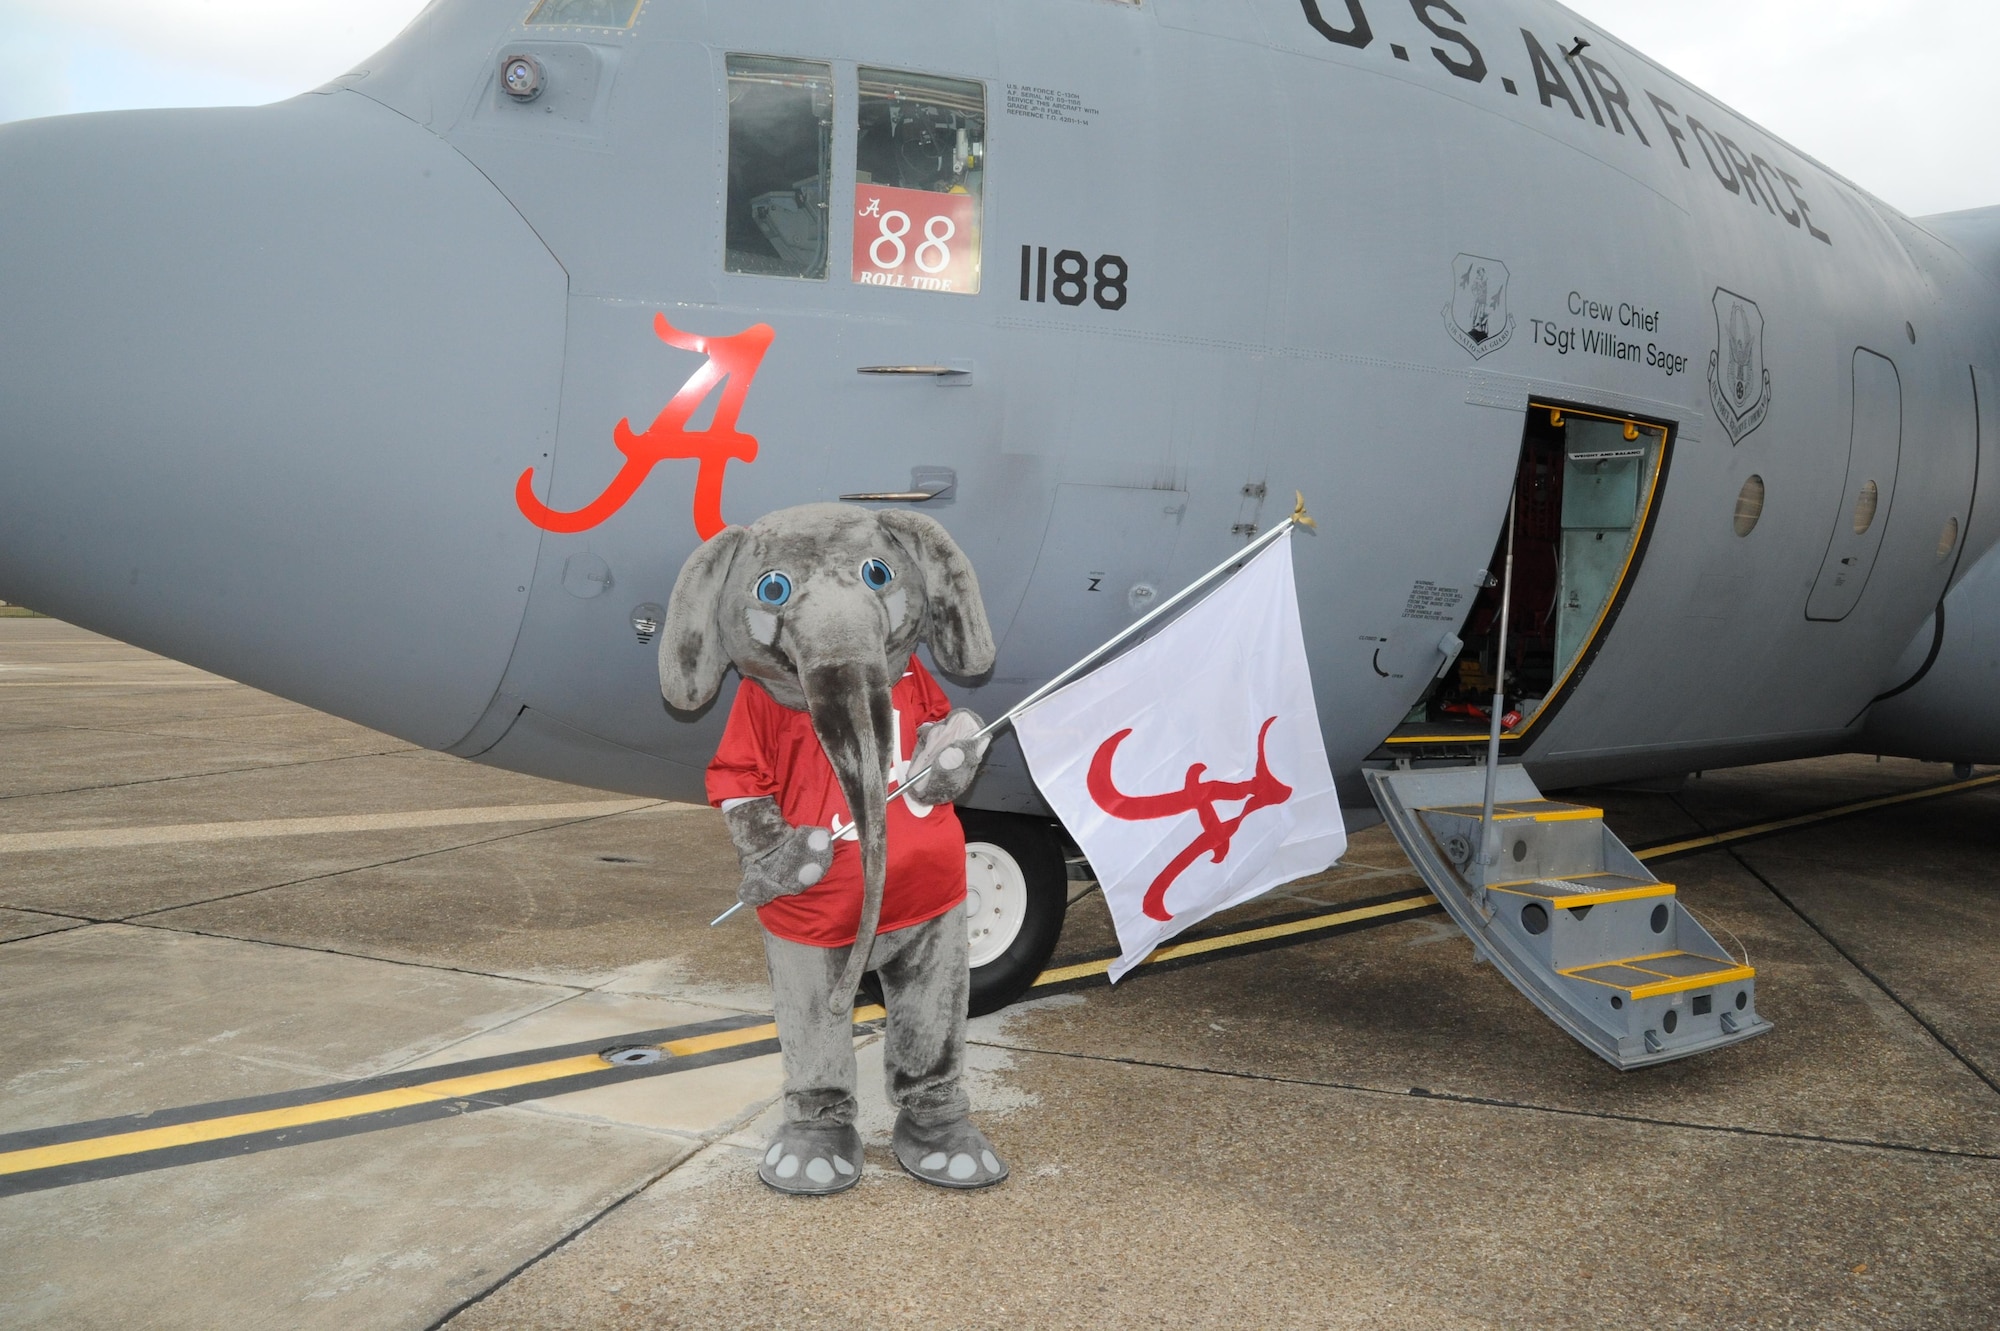 Big Al, the University of Alabama mascot, poses with the 908th Airlift Wing's aircraft 188 following a brief ceremony Jan 20 at Maxwell Air Force Base. During the ceremony the Roll Tide heritage was transferred from aircraft 42 to this newer C-130 Hercules. Aircraft 42 will depart soon for the Boneyard at Davis-Monthan Air Force Base, in Tucson, Ariz.